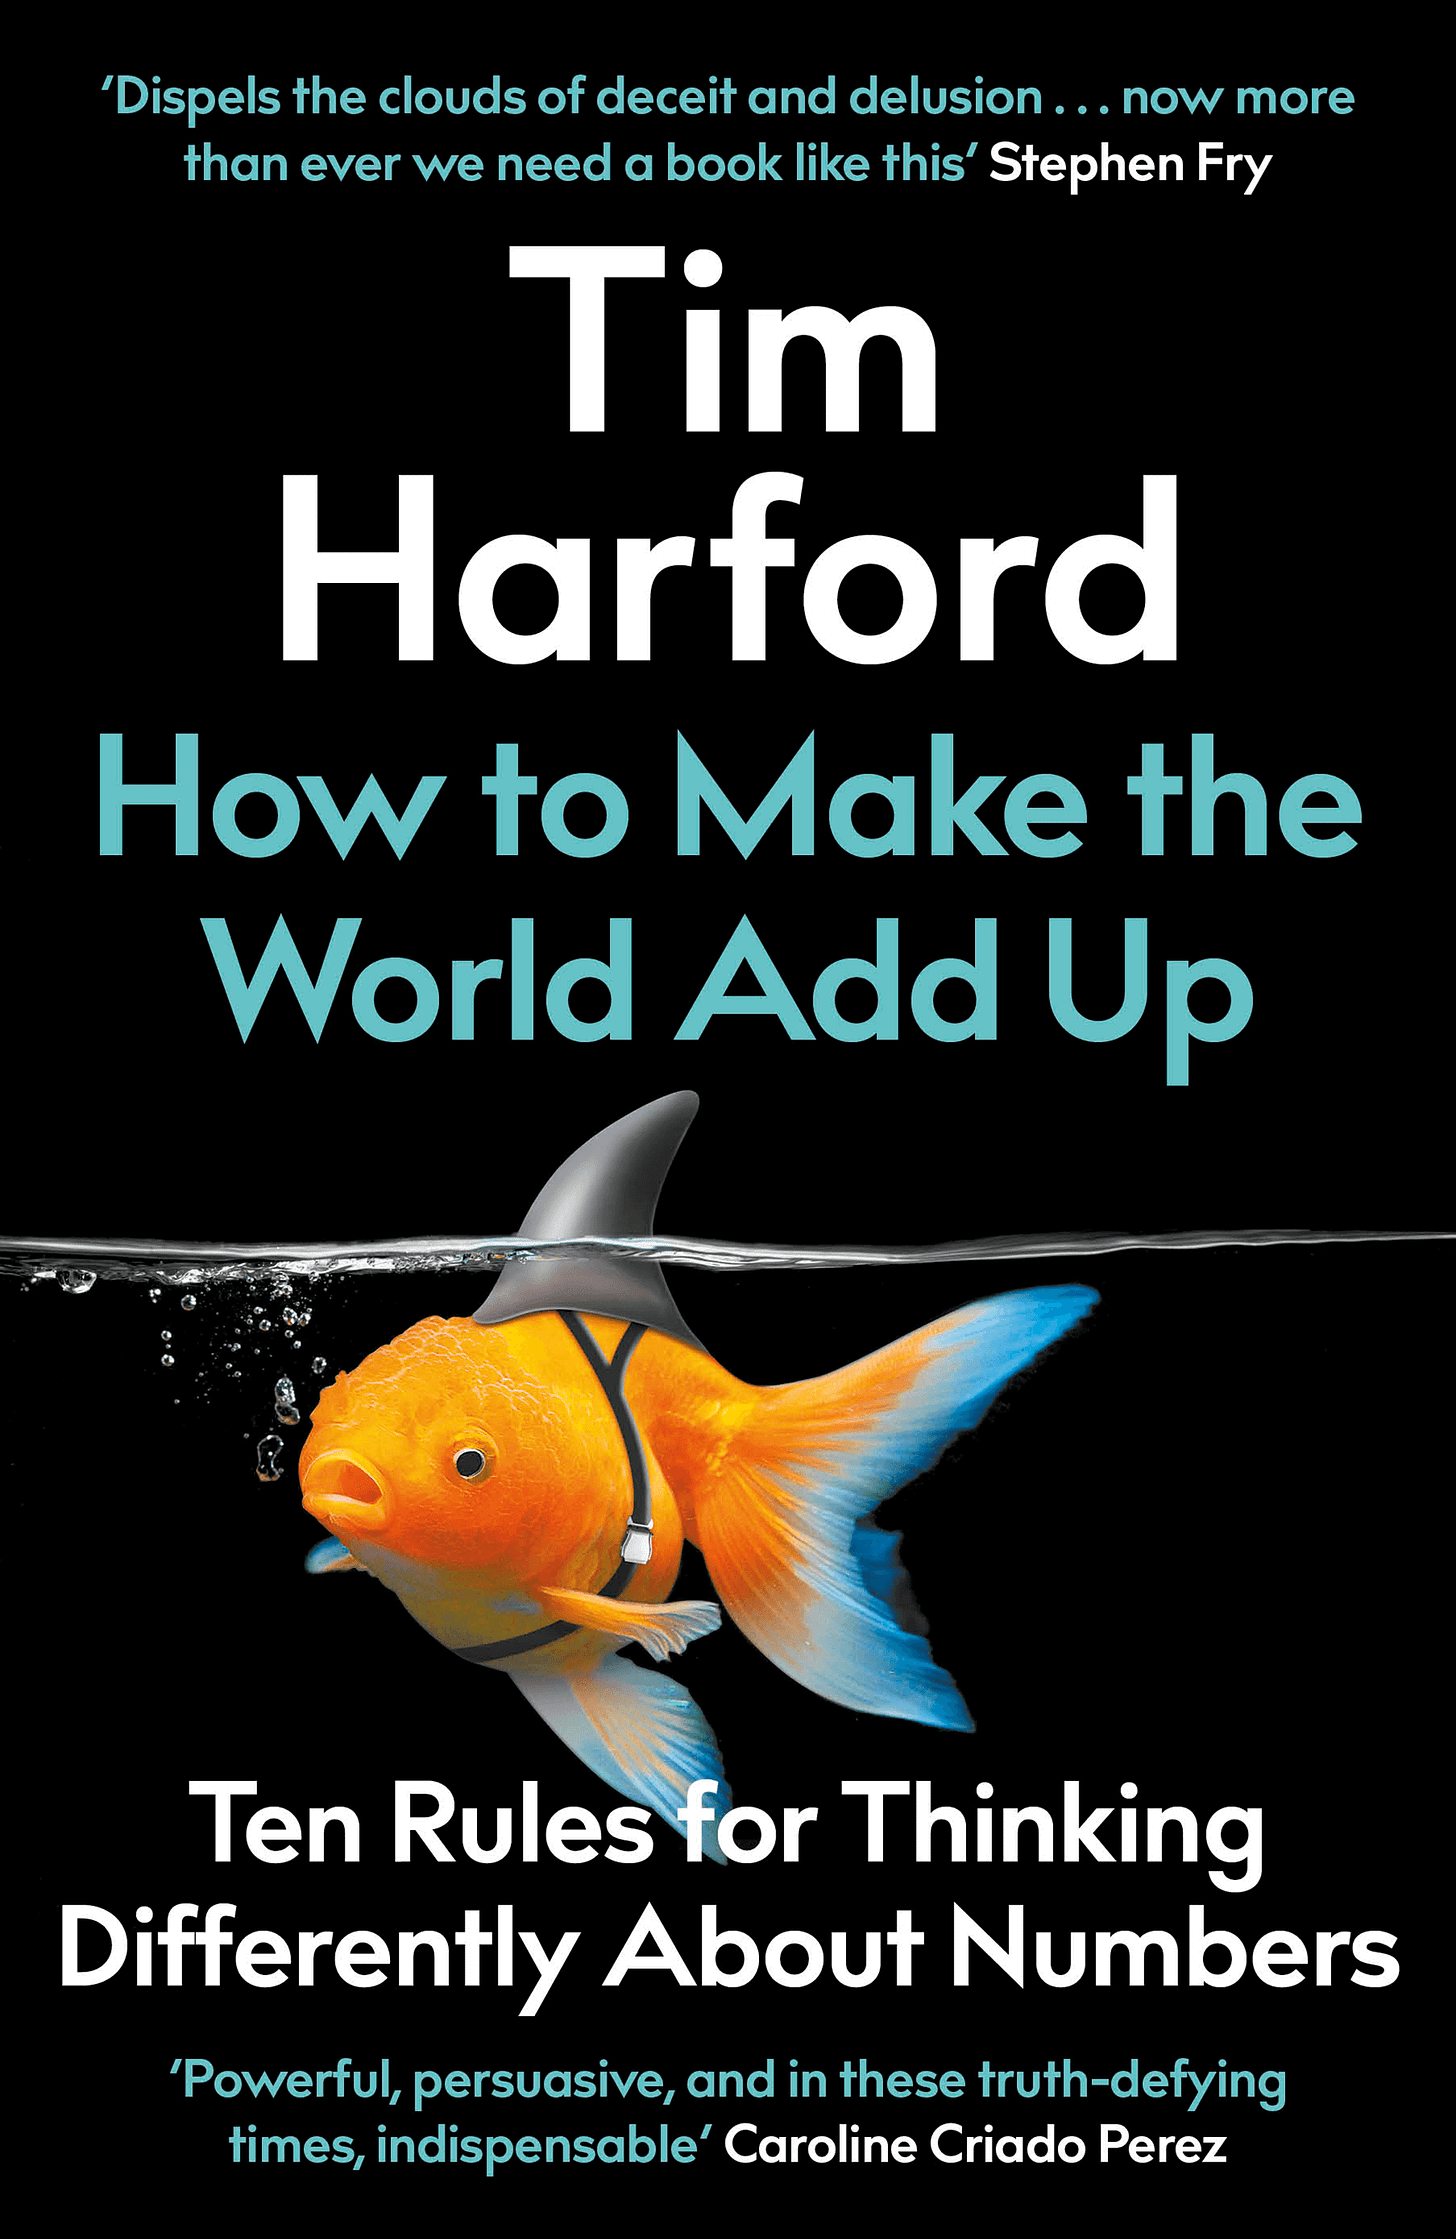 How to Make the World Add Up – Ten Rules for Thinking Differently About Numbers